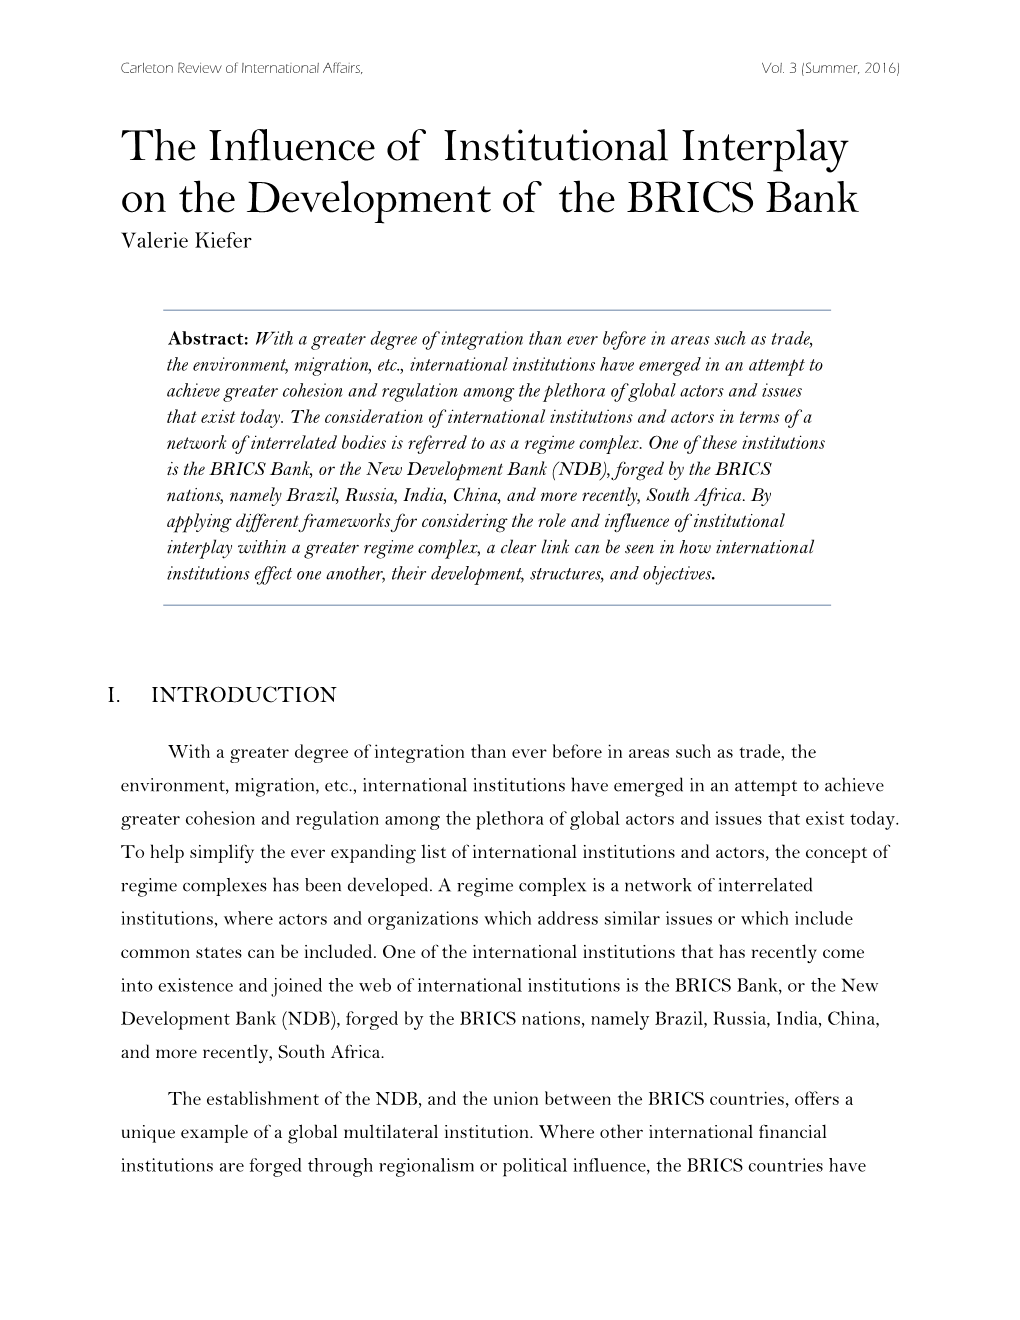 The Influence of Institutional Interplay on the Development of the BRICS Bank Valerie Kiefer